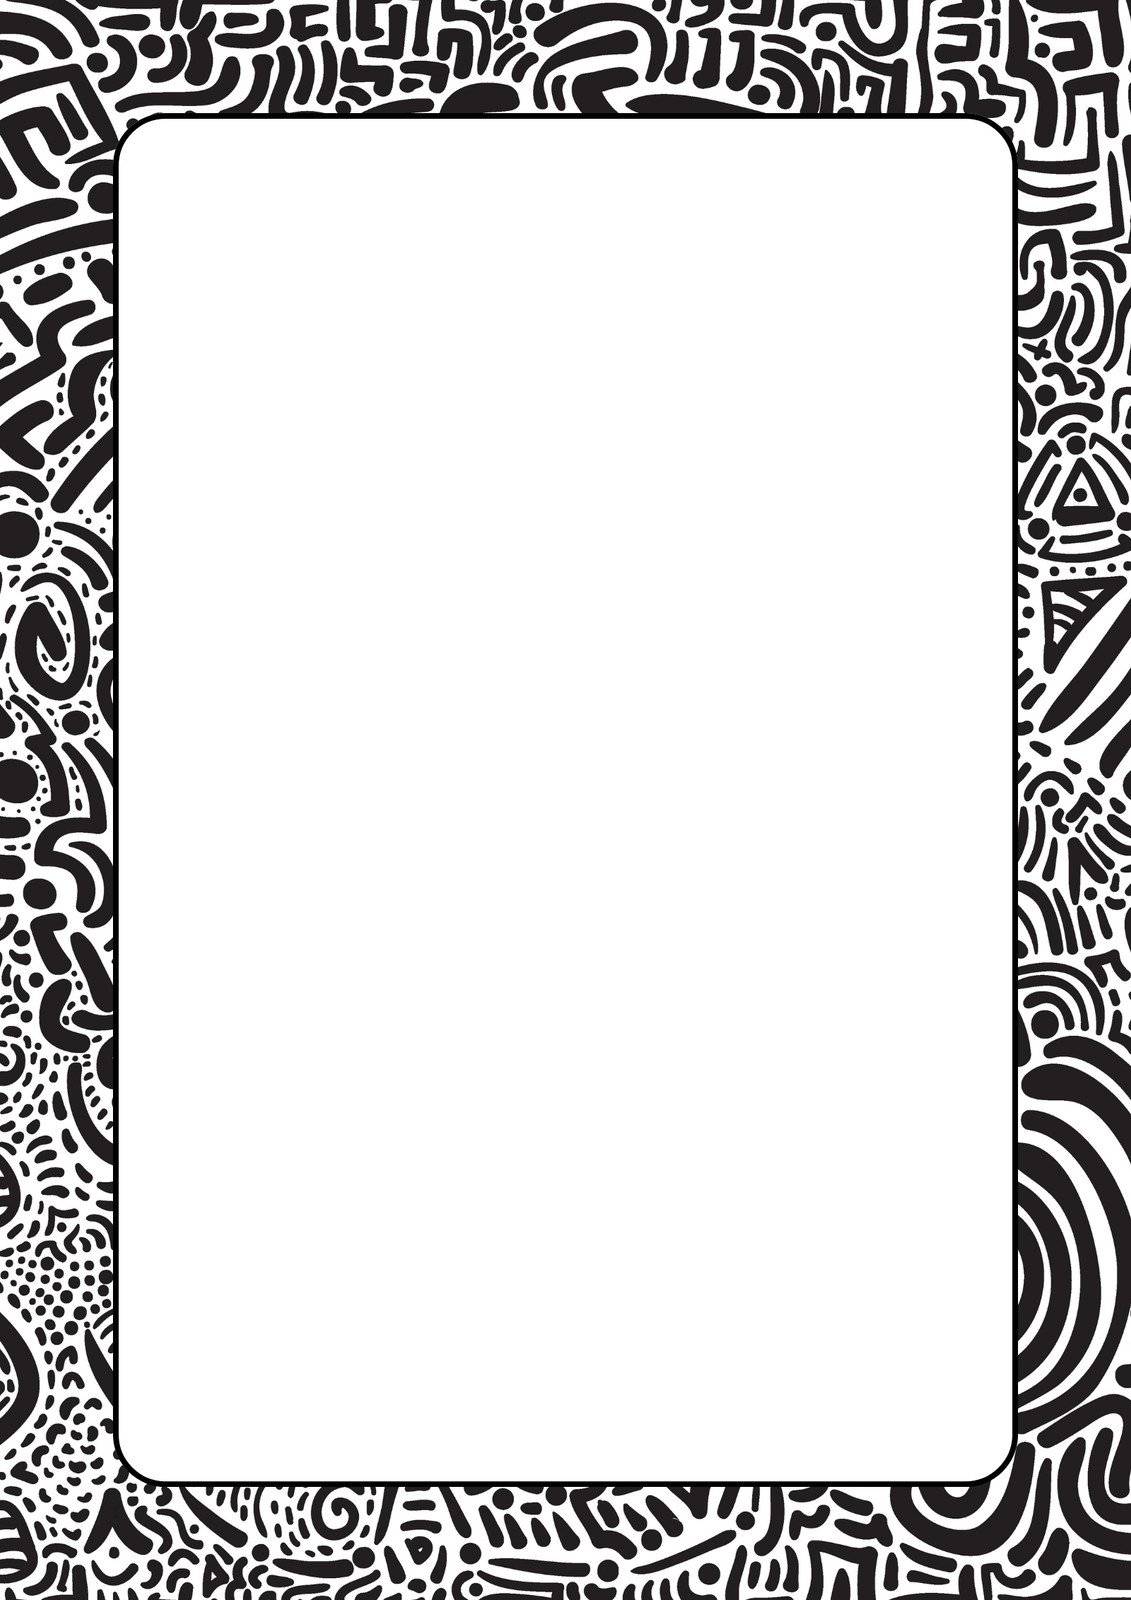 https://marketplace.canva.com/EAFsMCTCXZU/1/0/1131w/canva-black-and-white-abstract-doodle-page-border-kGYPDg3NDXU.jpg